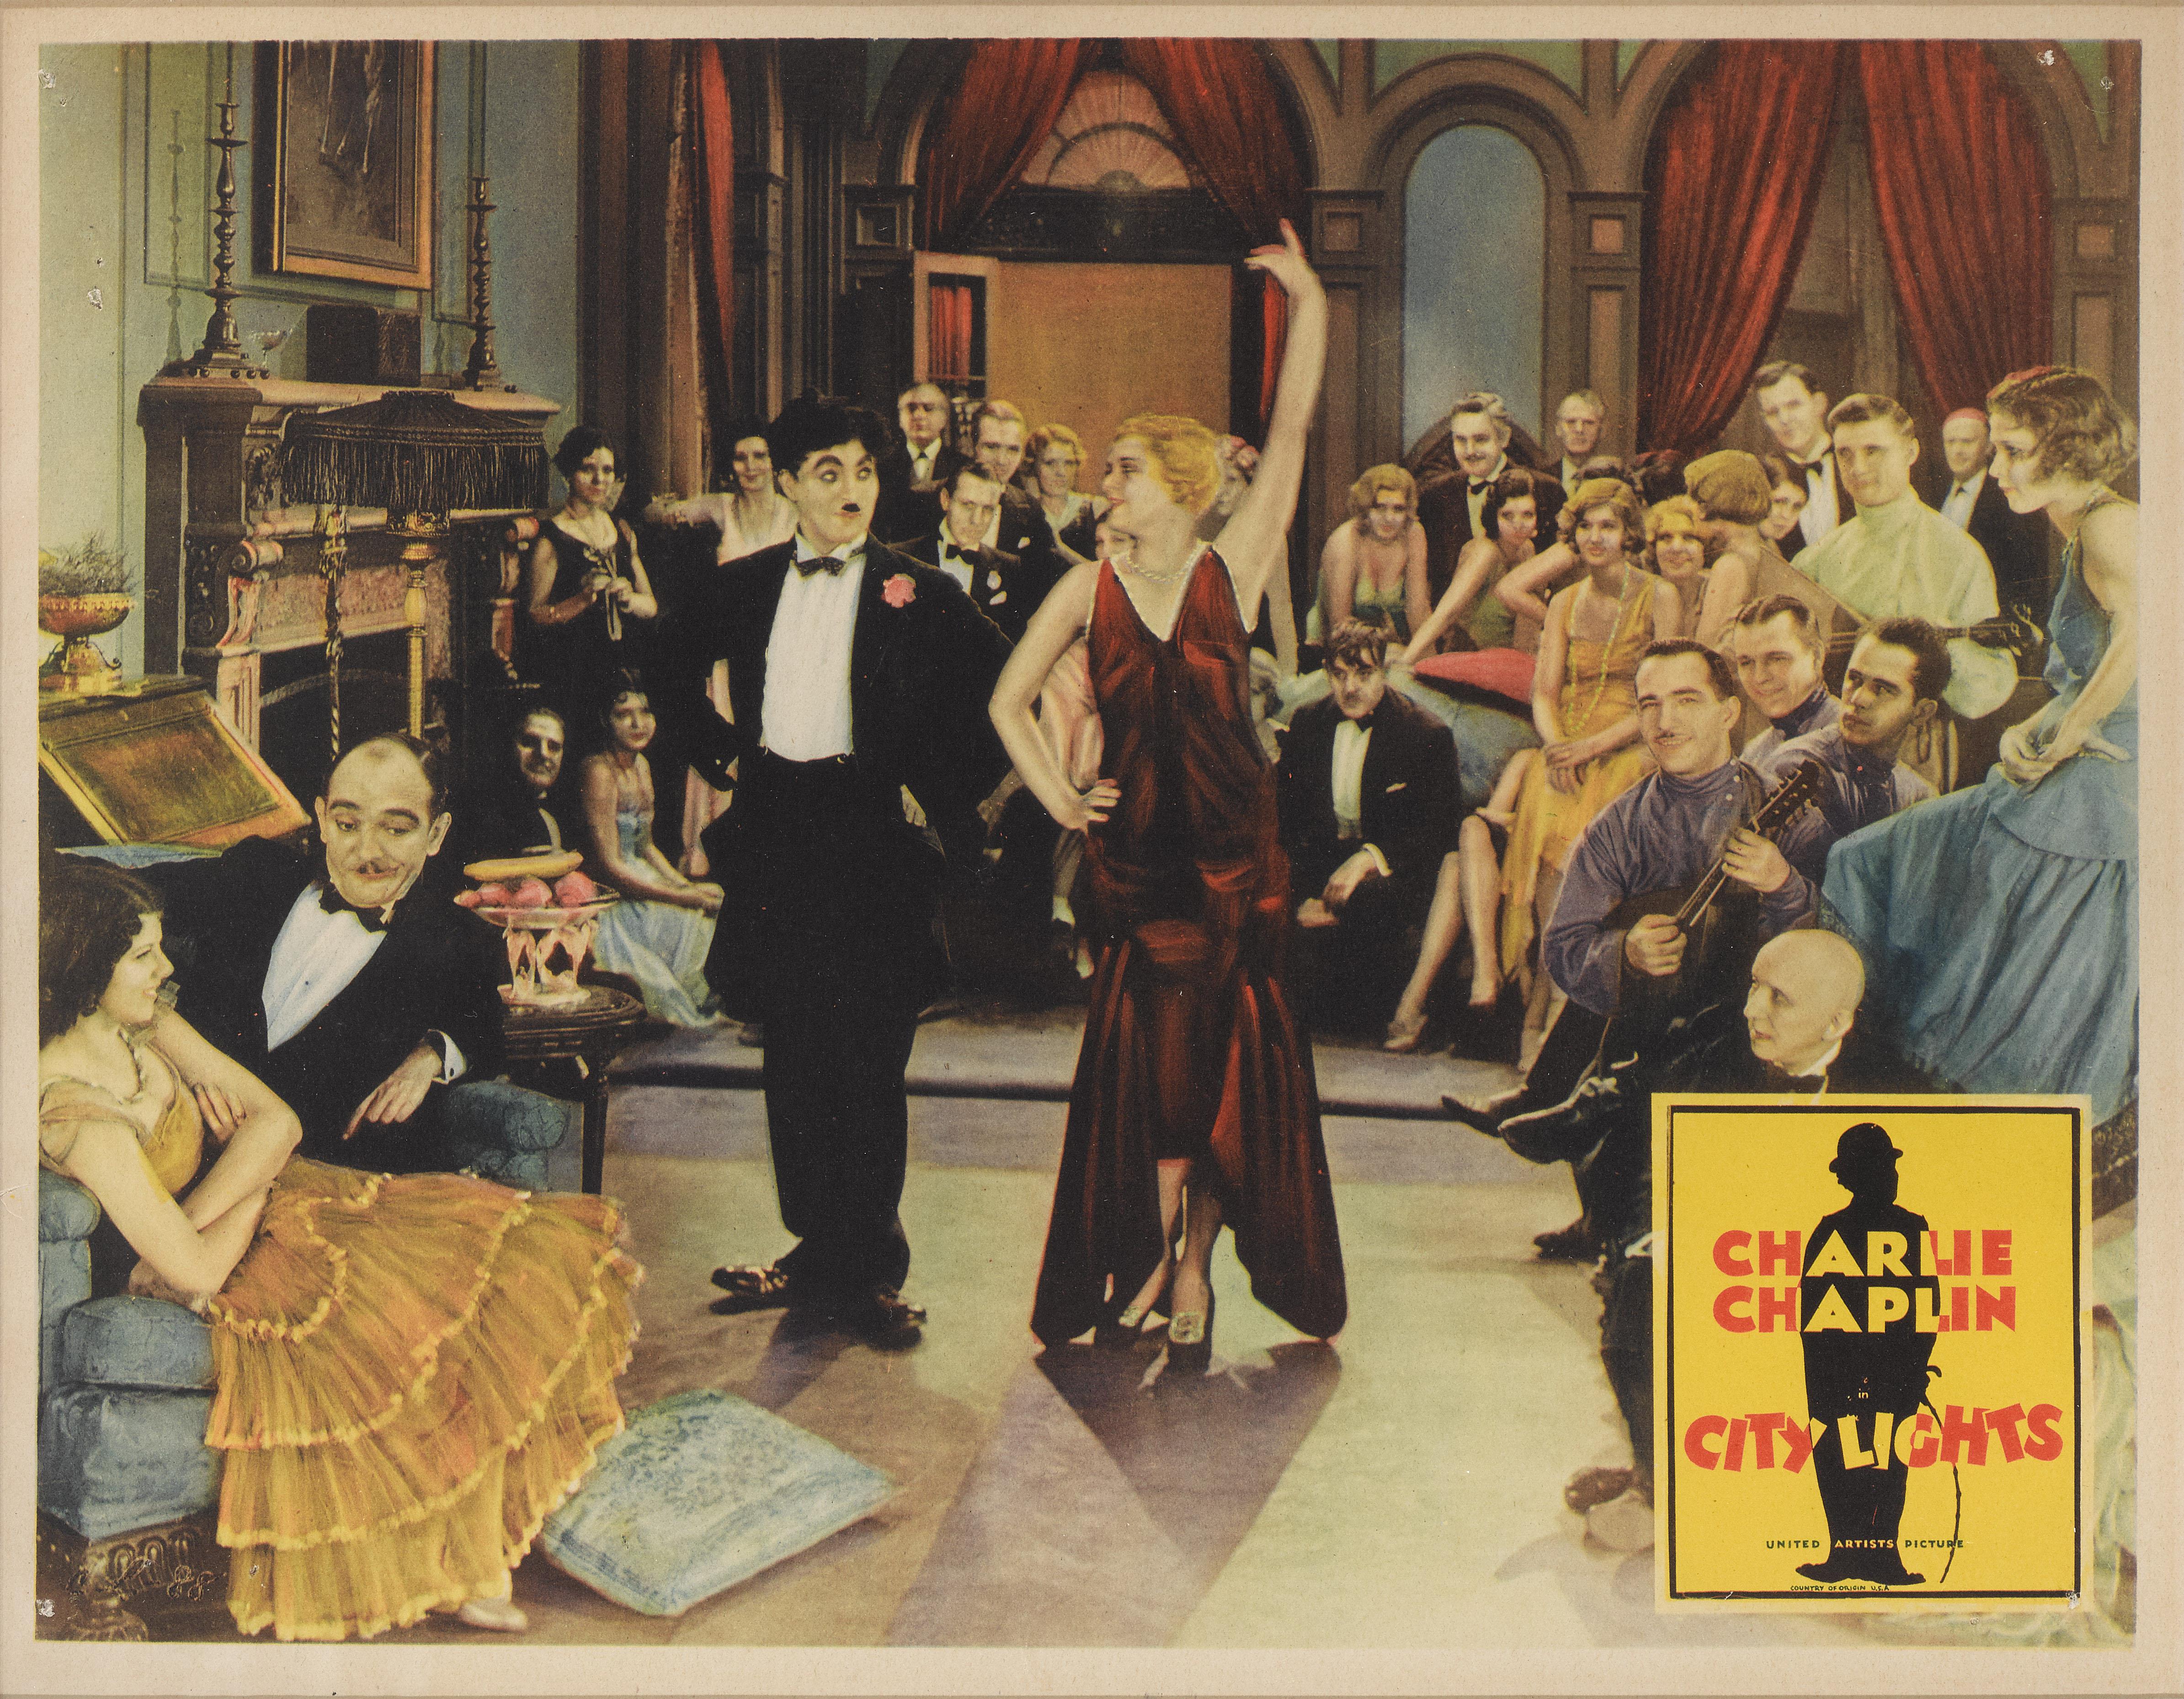 This is a rare and desirable original US lobby card  for the one of Charlie Chaplin's greatest films. It was released in 1931 when sound had already been out for a few years. Chaplin chose to make this particular film without sound, which did not